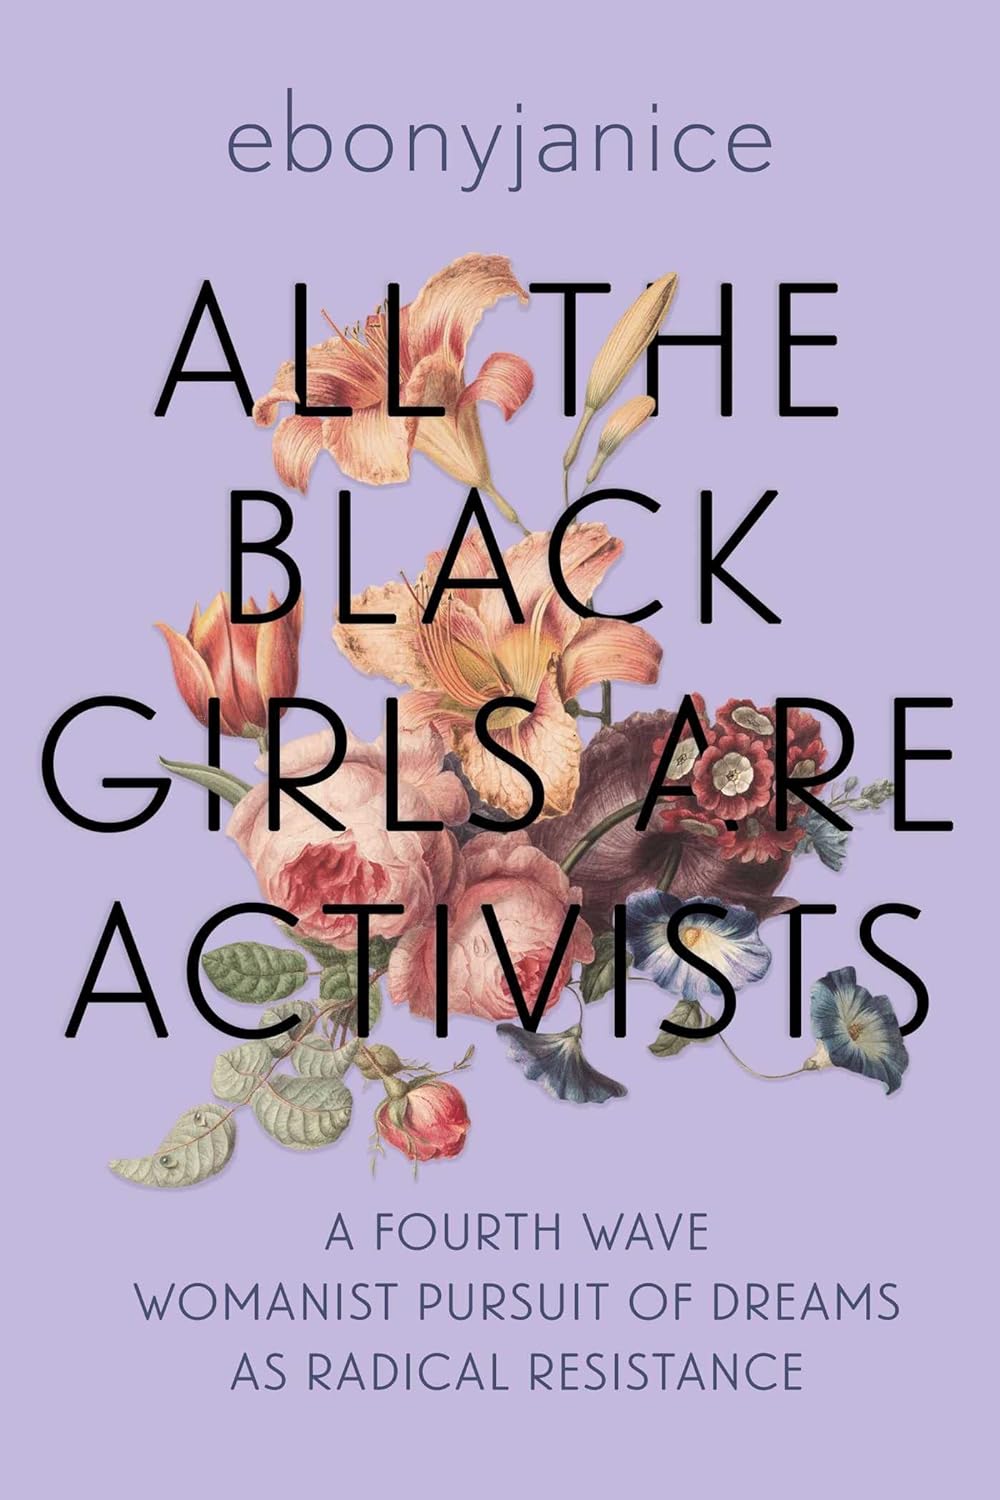 All the Black Girls Are Activists: A Fourth Wave Womanist Pursuit of Dreams as Radical Resistance by EbonyJanice